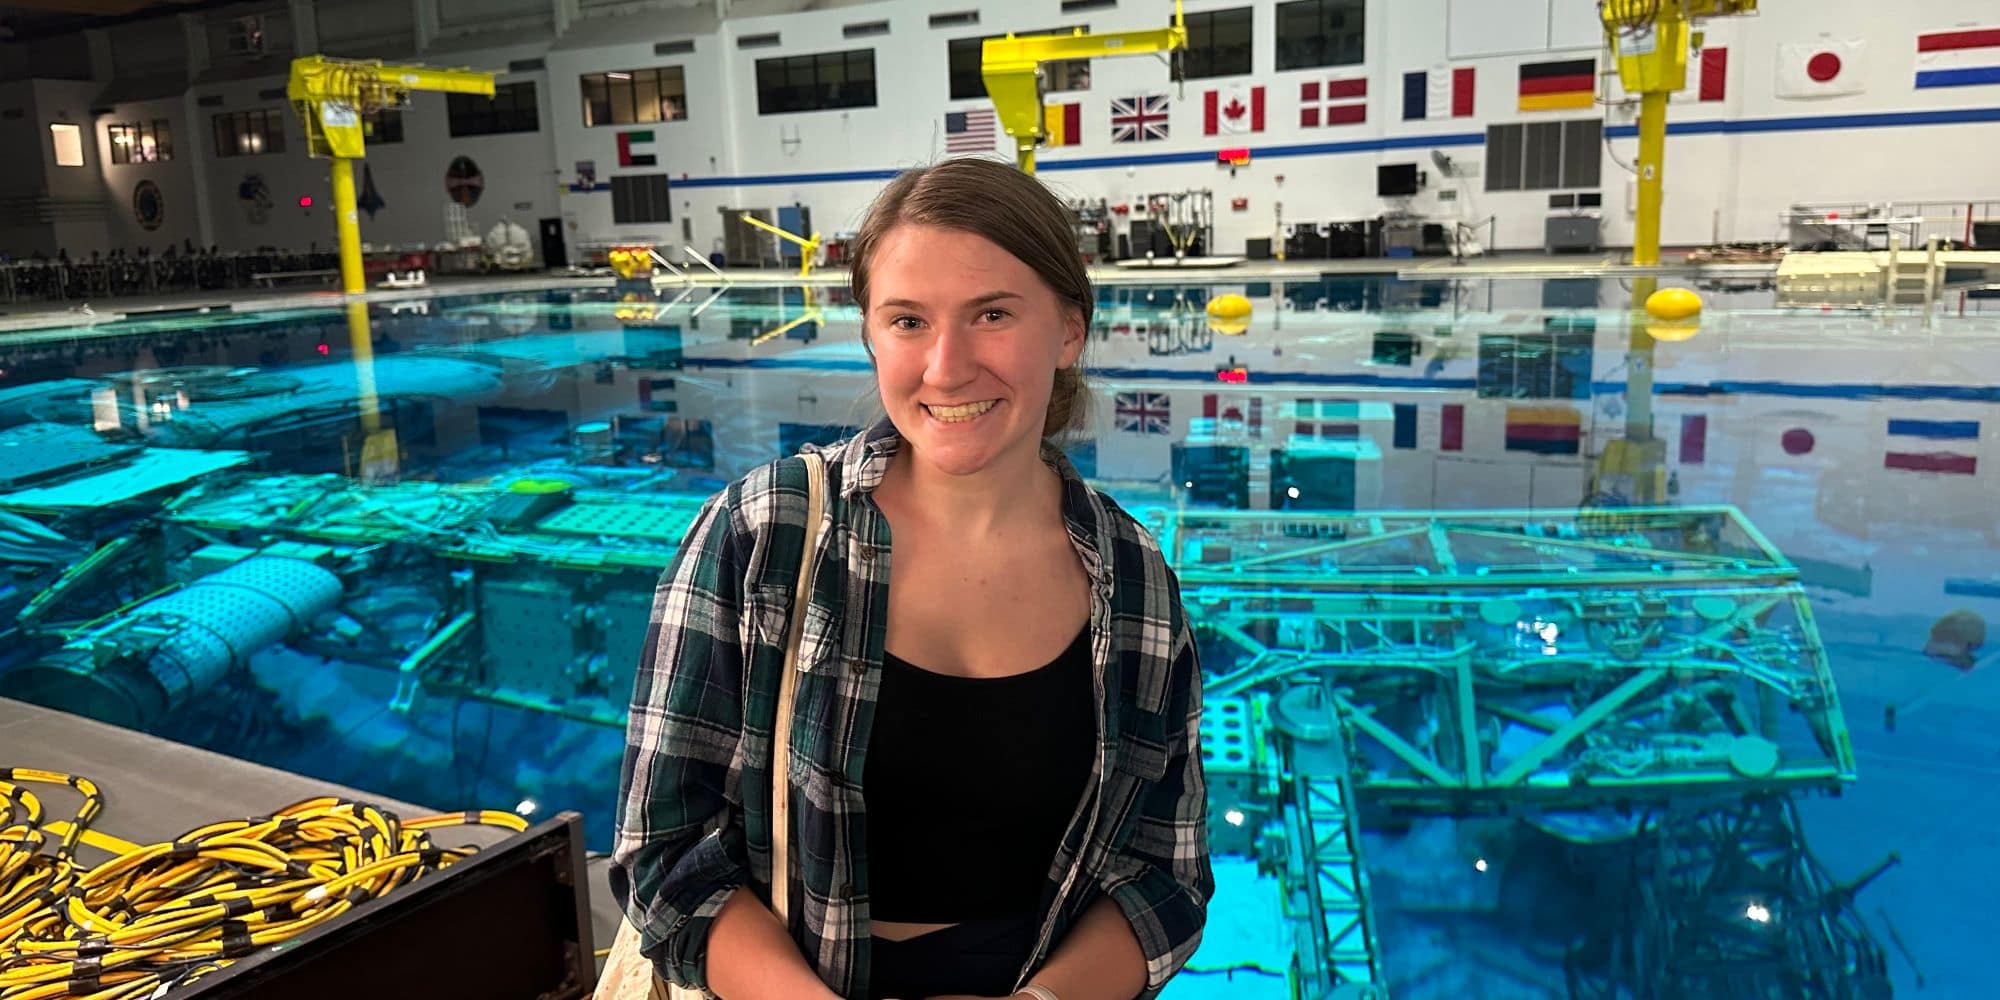 Engineering Physics student Kaley Eaton at NASA’s Neutral Buoyancy Lab, featuring a 1:1 scale model of the U.S. part of the International Space Station (ISS). (Photo: Kaley Eaton)